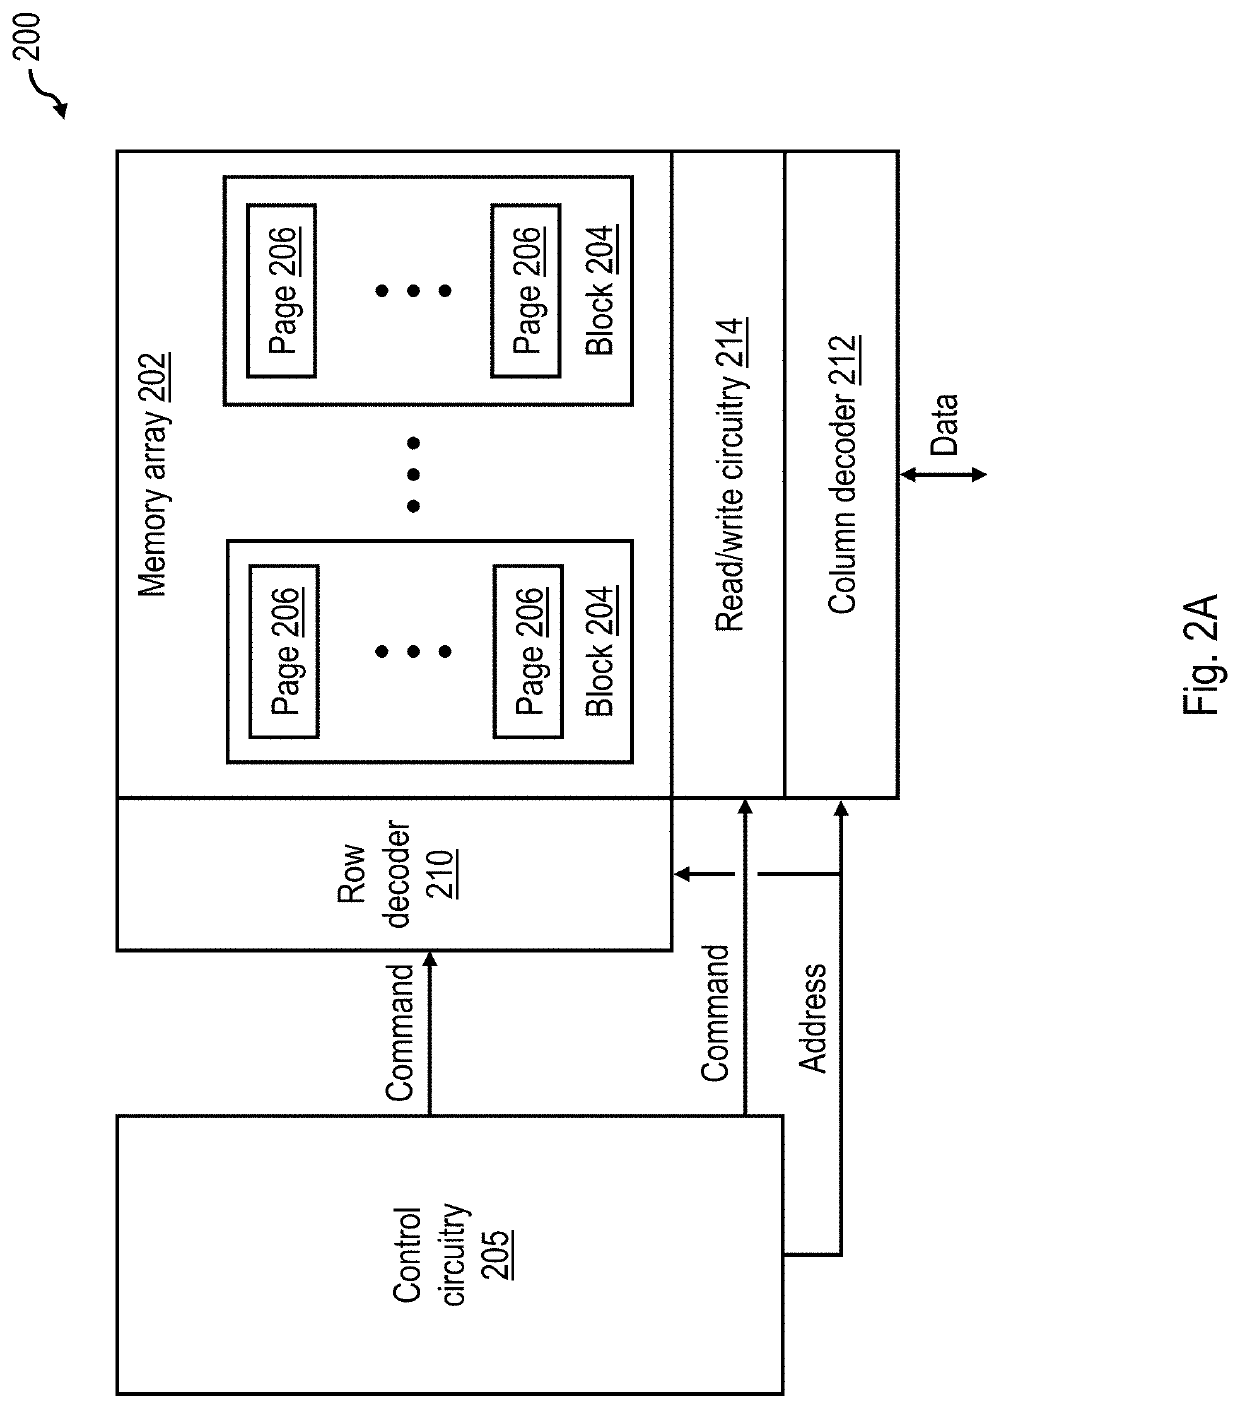 Garbage collection in non-volatile memory that fully programs dependent layers in a target block